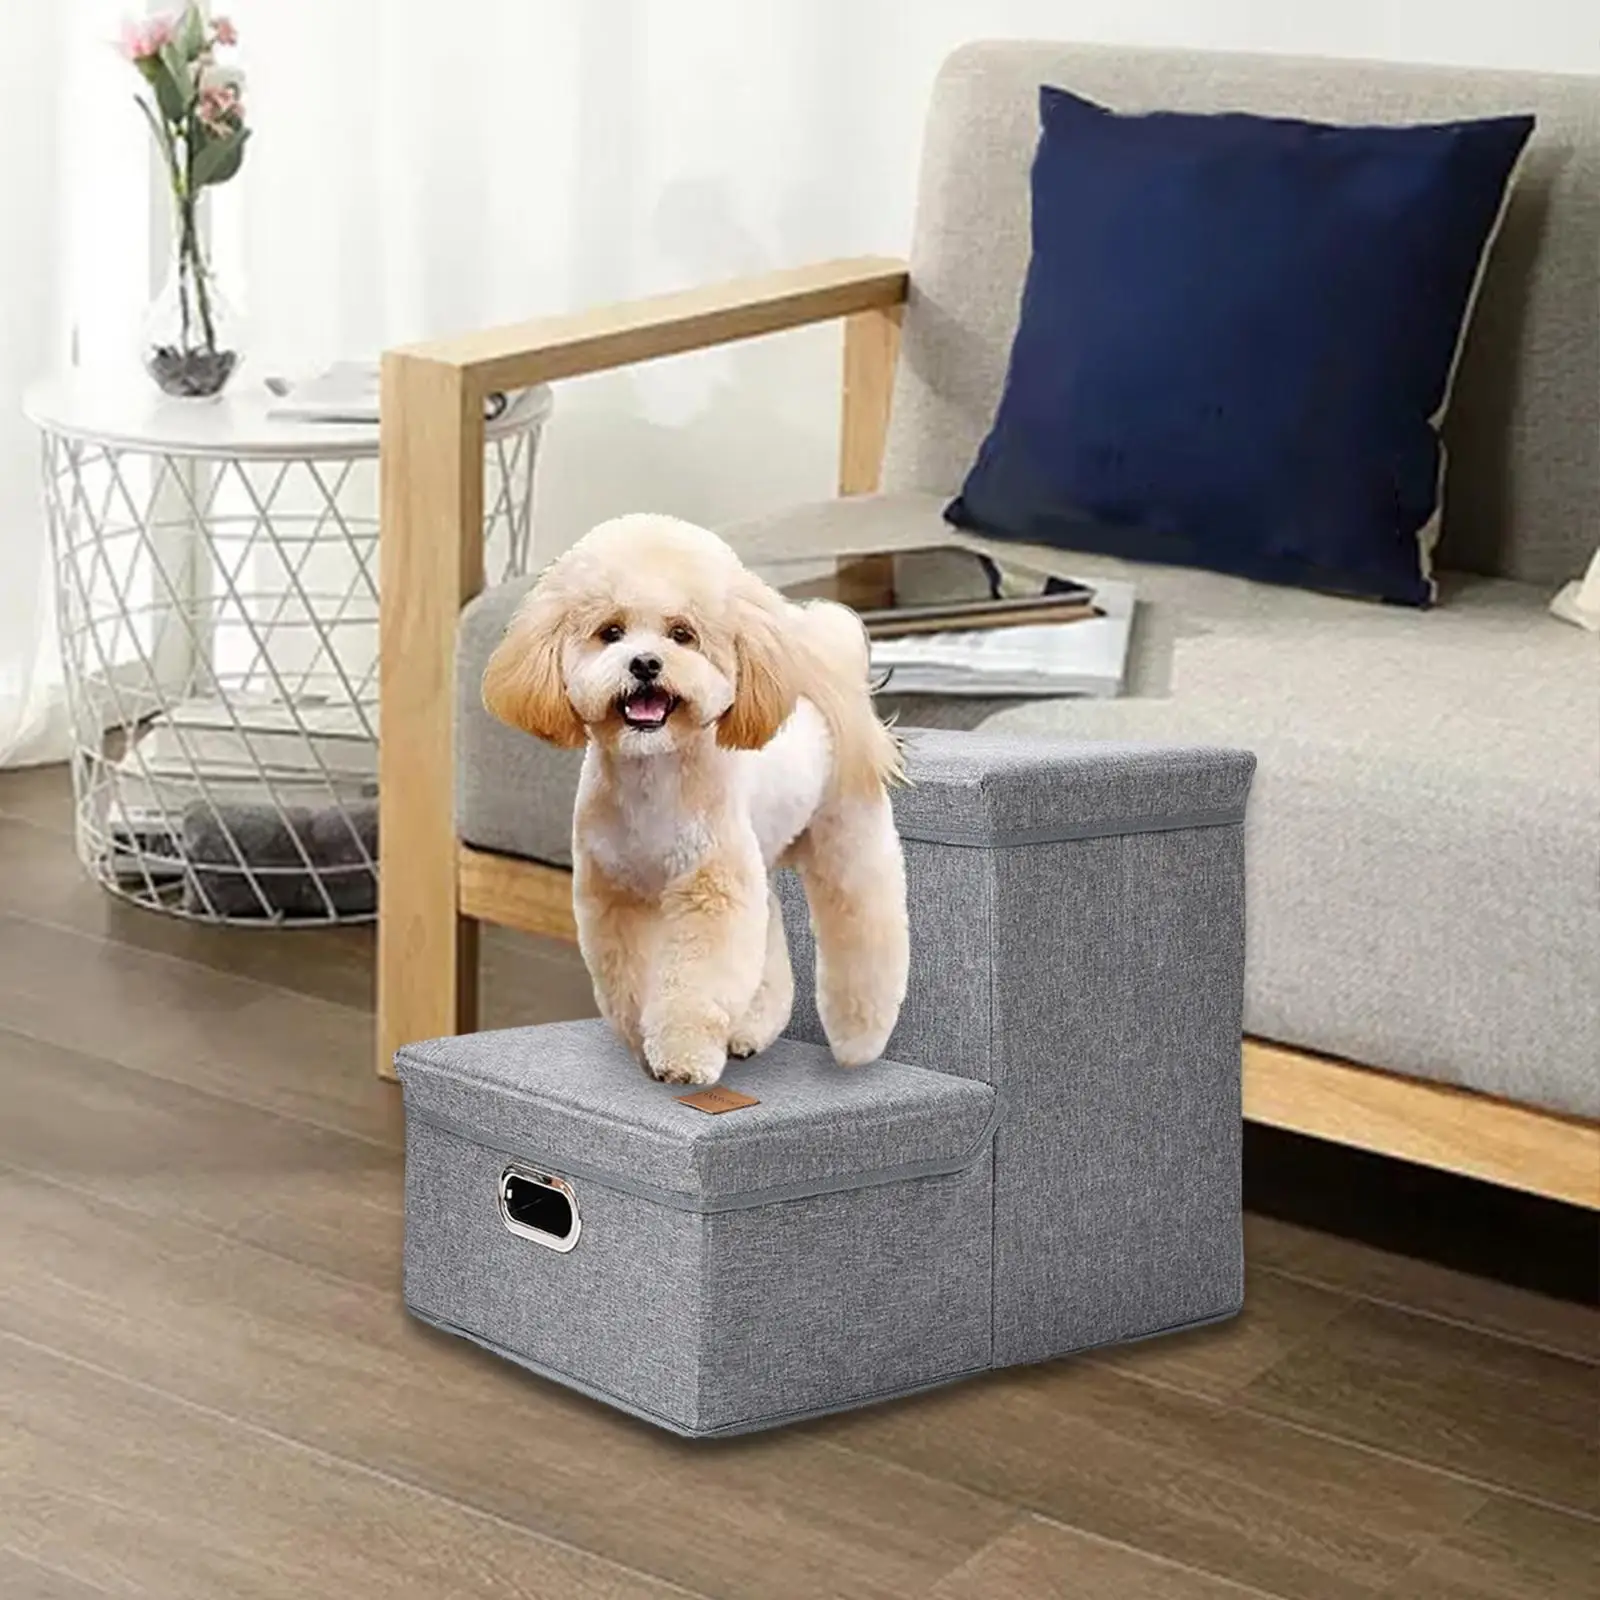 Pet Ladder with Storage Box Multi Use Small Dog Ramp Pet Dog Ramps for Sofa Puppy High Bed Small Medium Large Dogs Cats